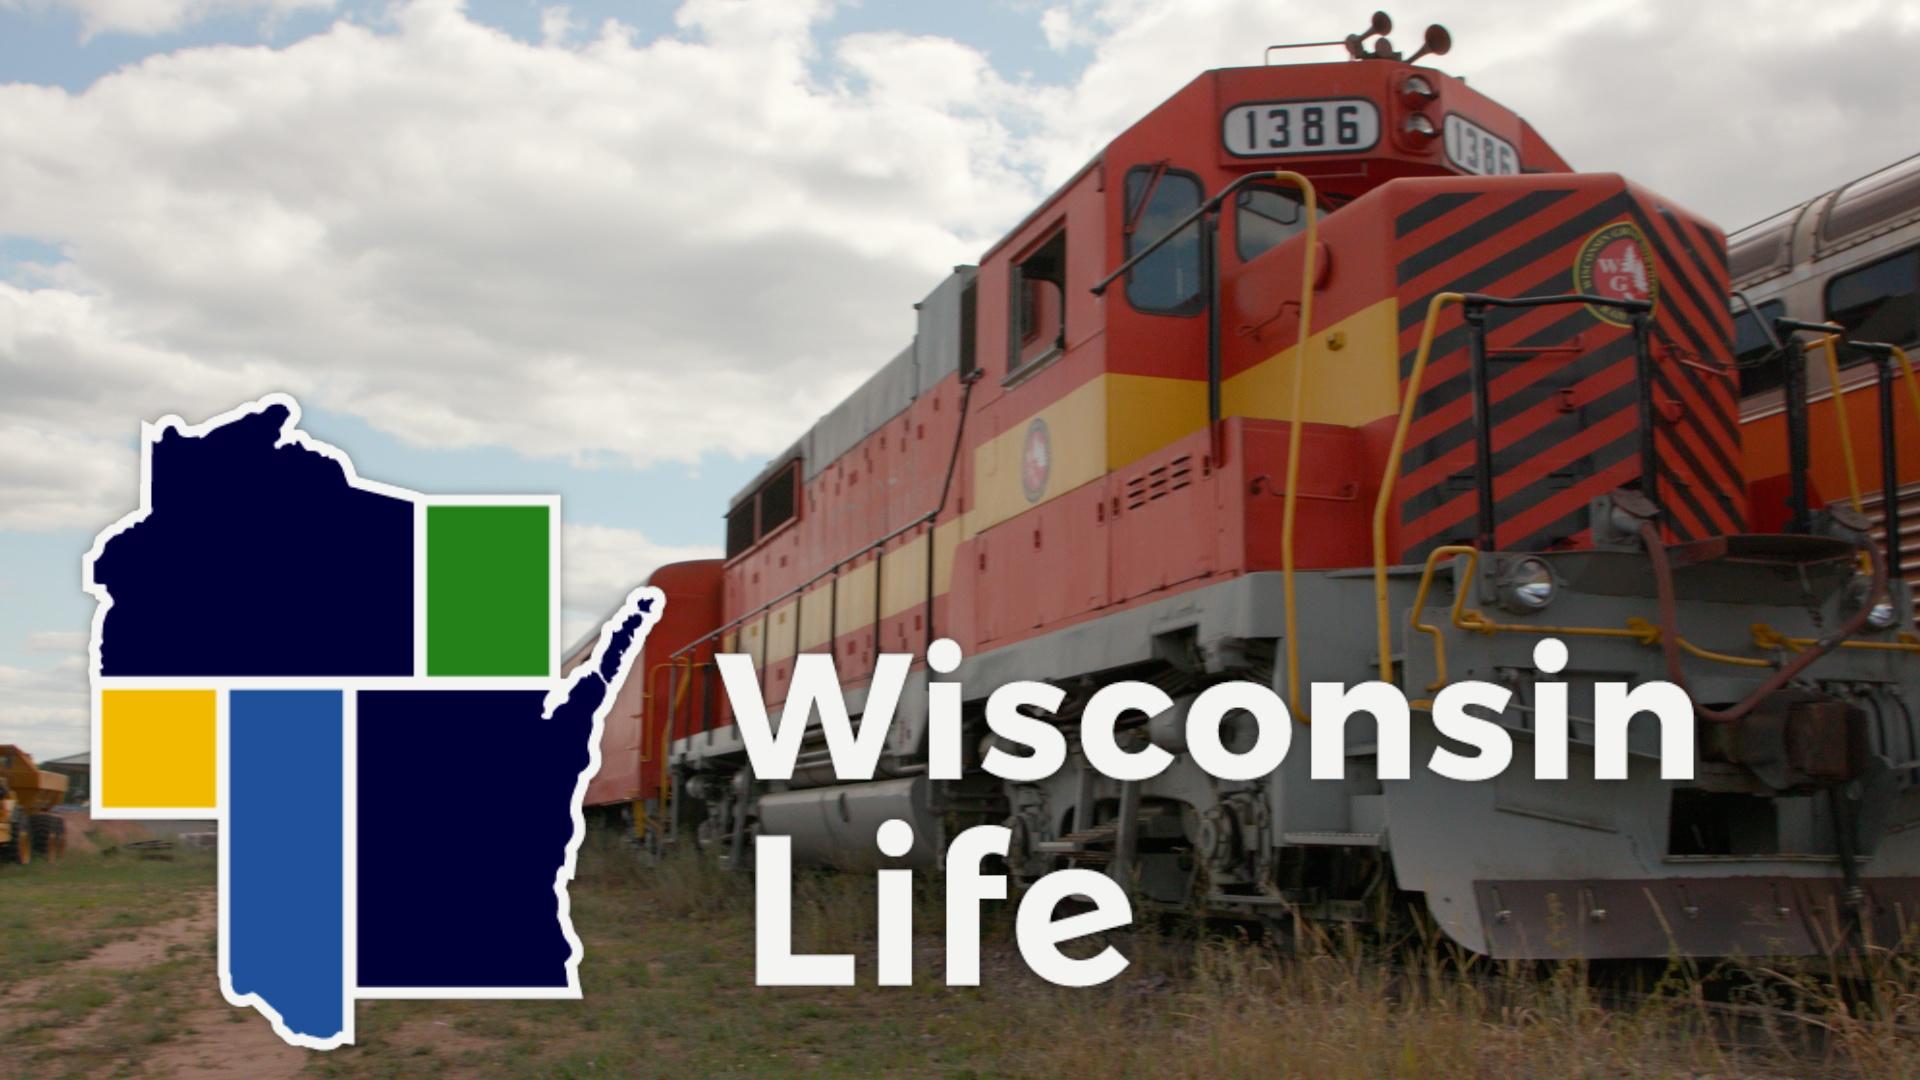 Wisconsin Great Northern Railroad